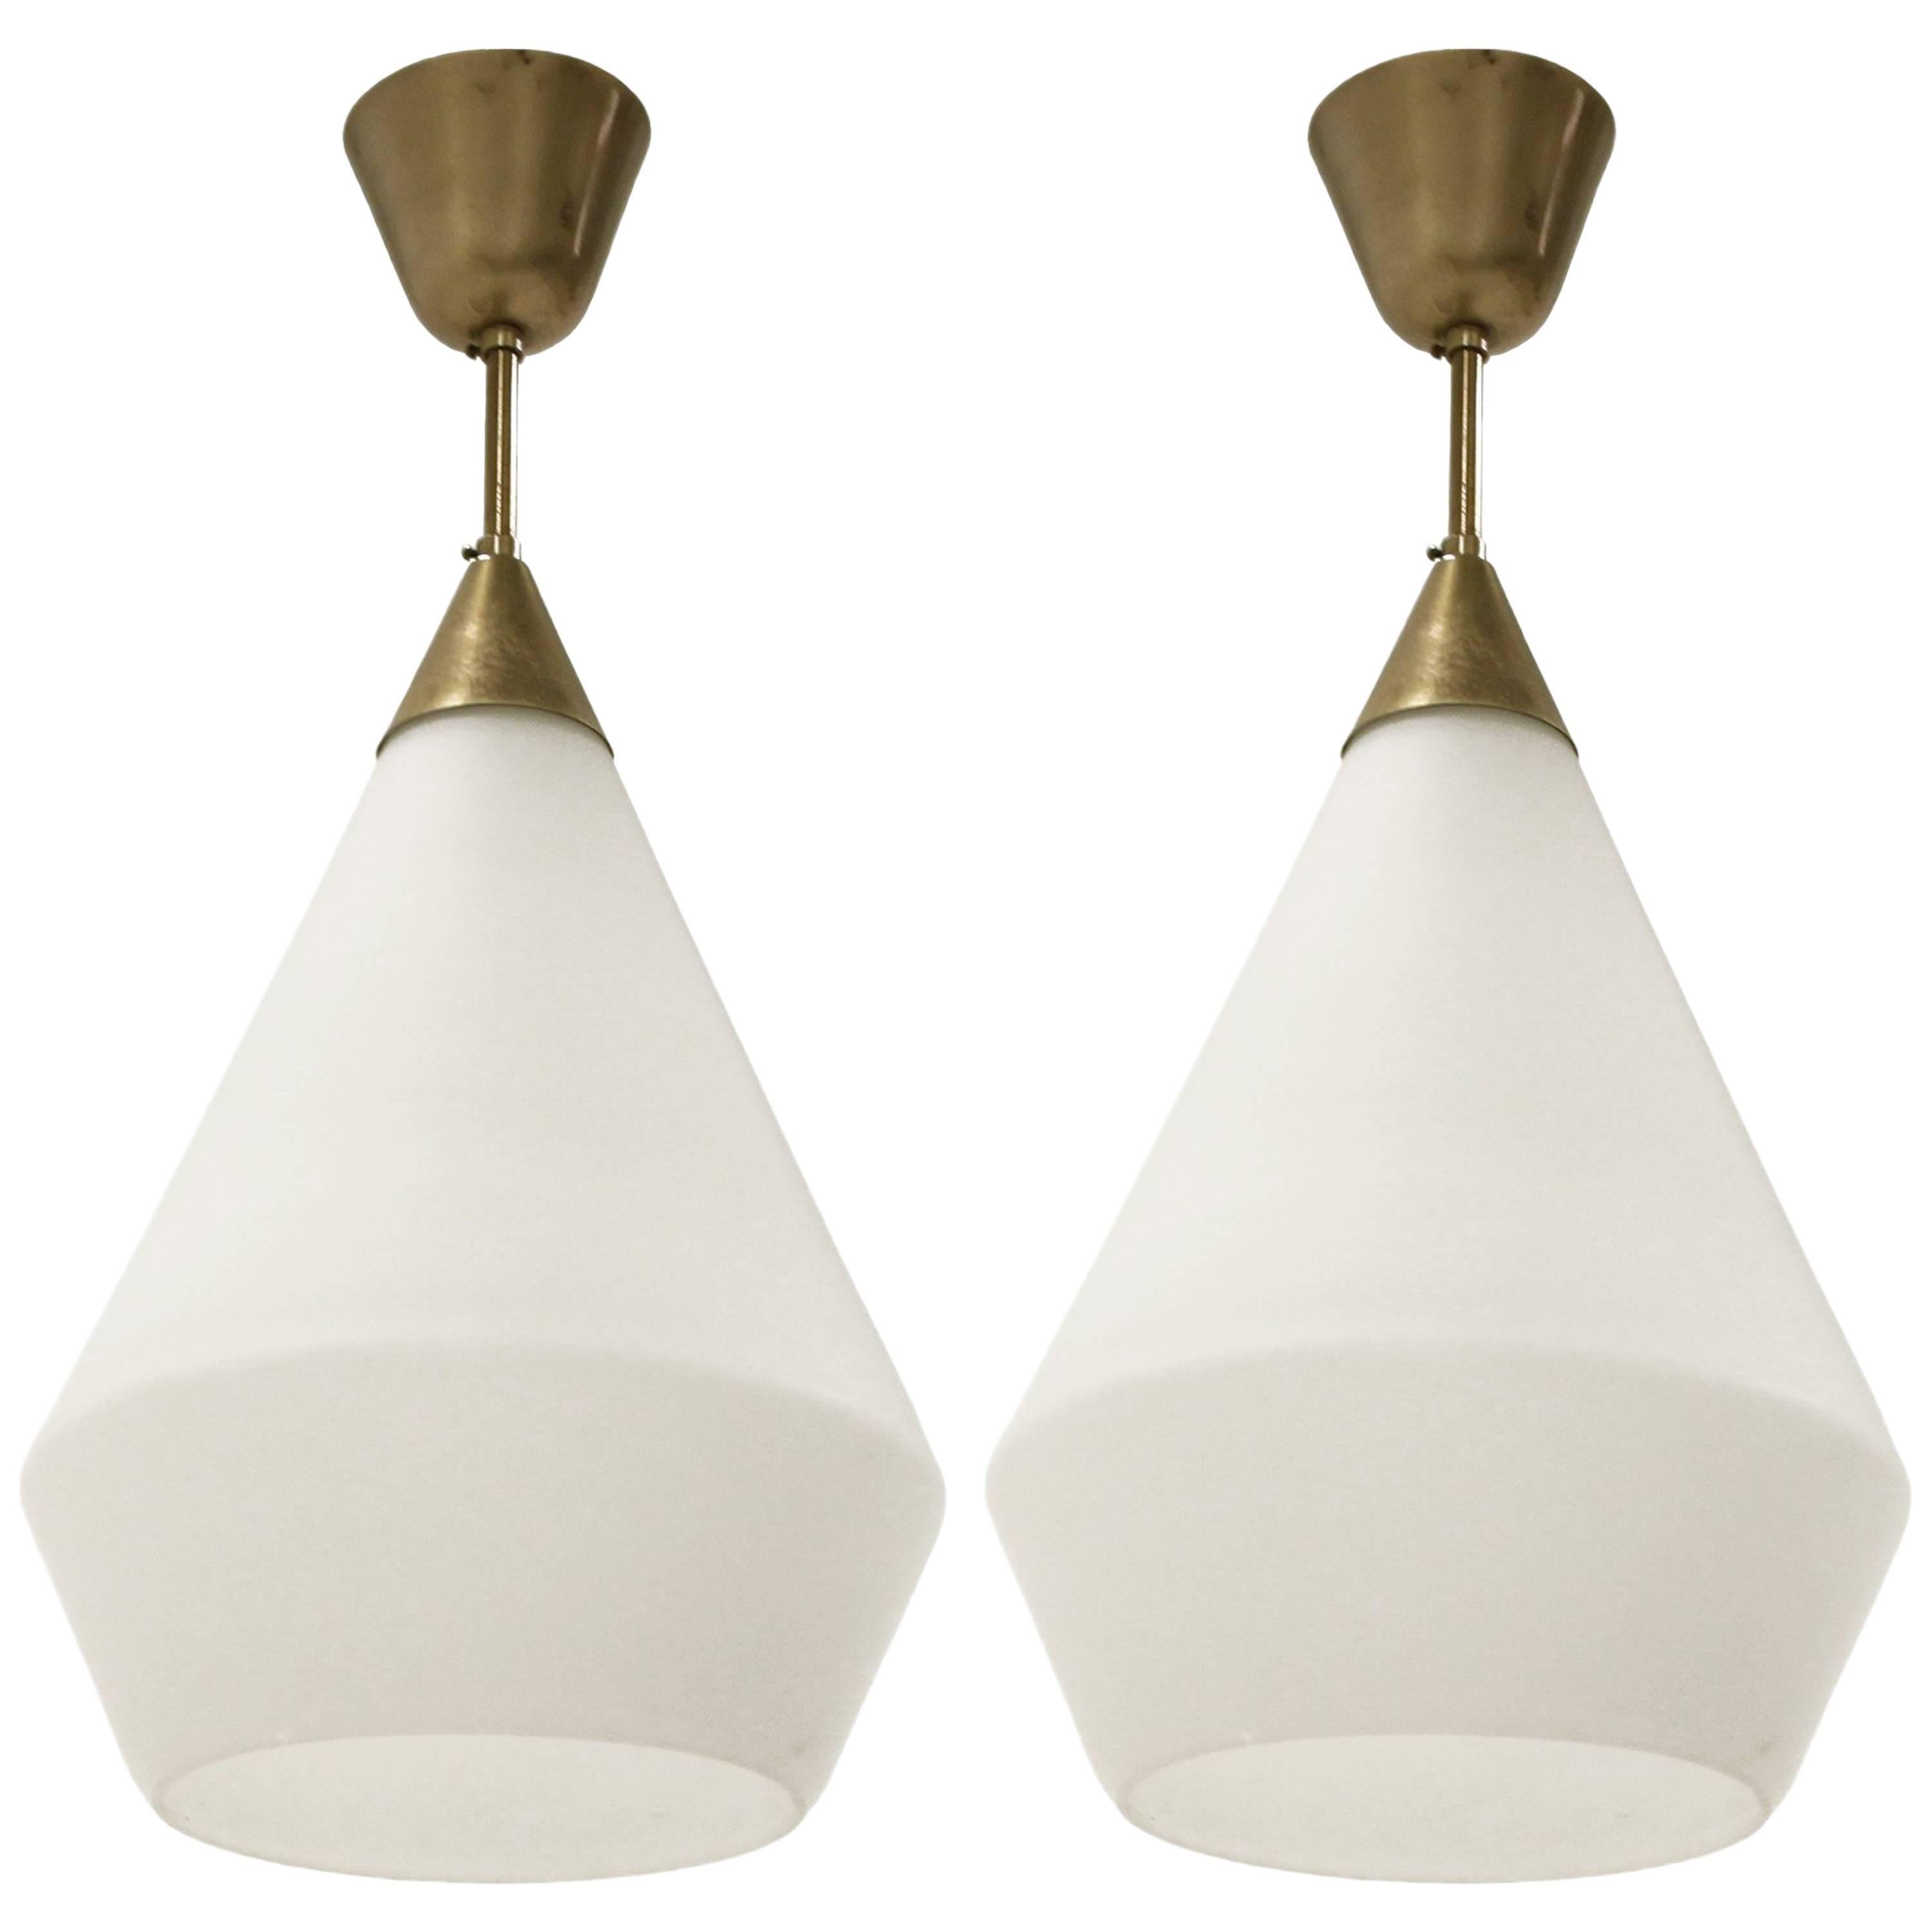 Pair of Large Mid-Century Pendant Lights by Birger Dahl for Sønnico, 1960s